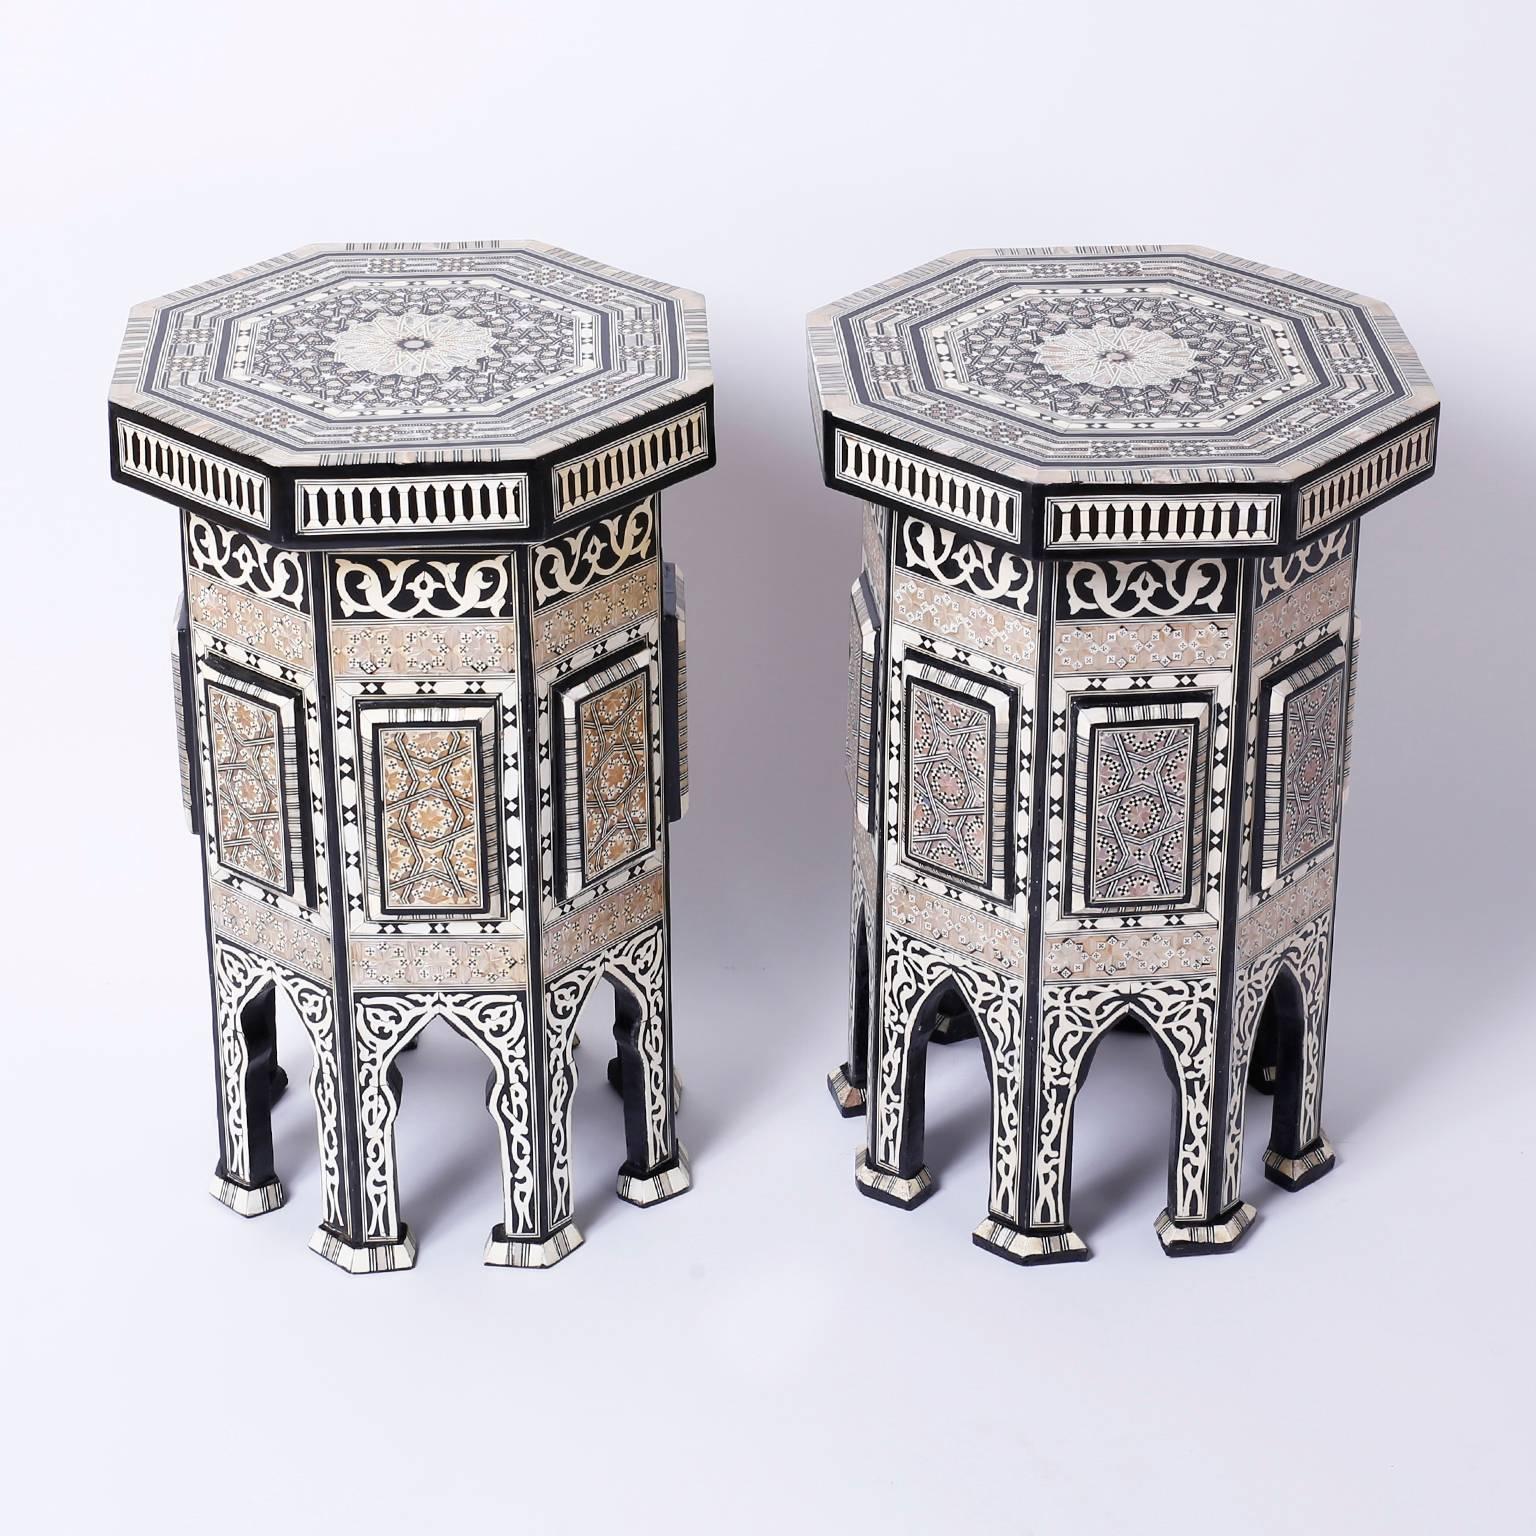 Lofty pair of antique Syrian octagon end tables or stands elaborately
decorated with inlaid mother of pearl. Bone and exotic hardwoods in
floral and geometric patterns adorn all eight sides and tops. The feet
are moorish ashes which complete the